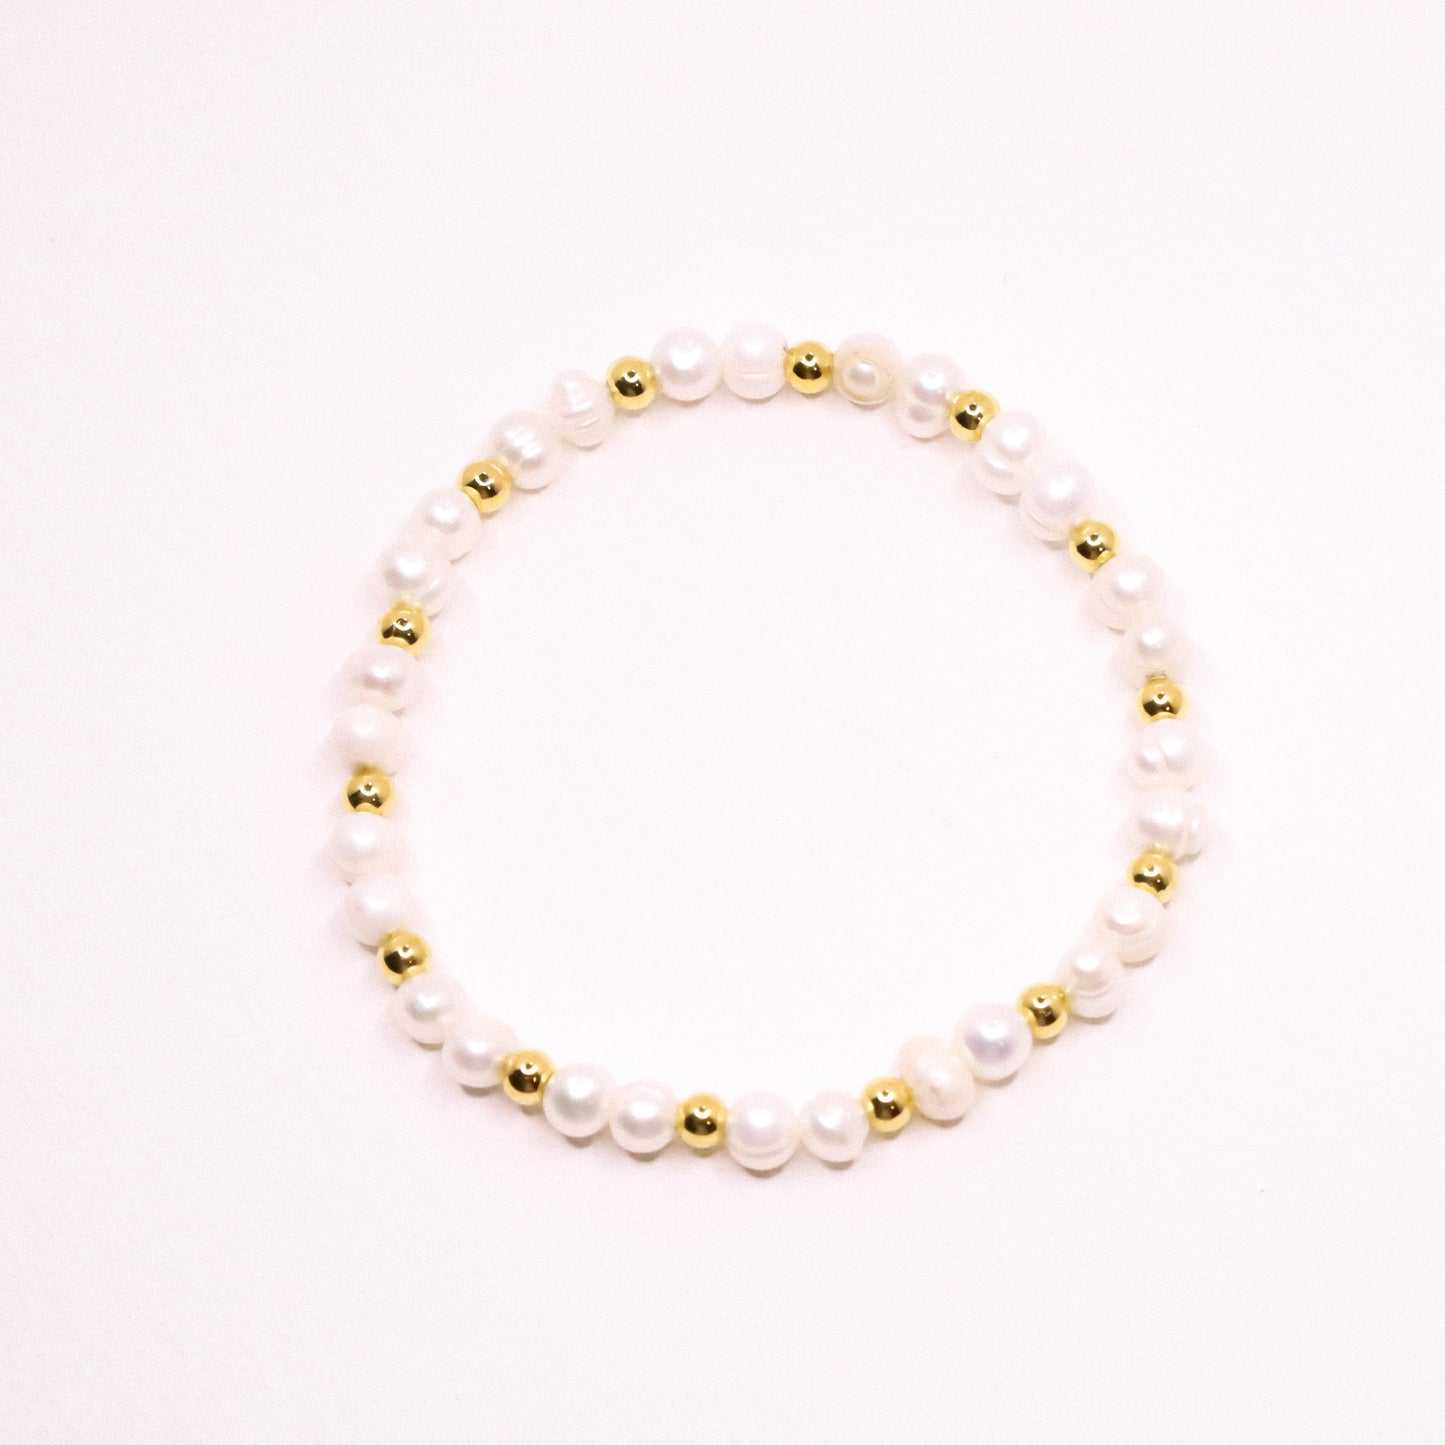 Gold filled beaded bracelet with Freshwater Pearls